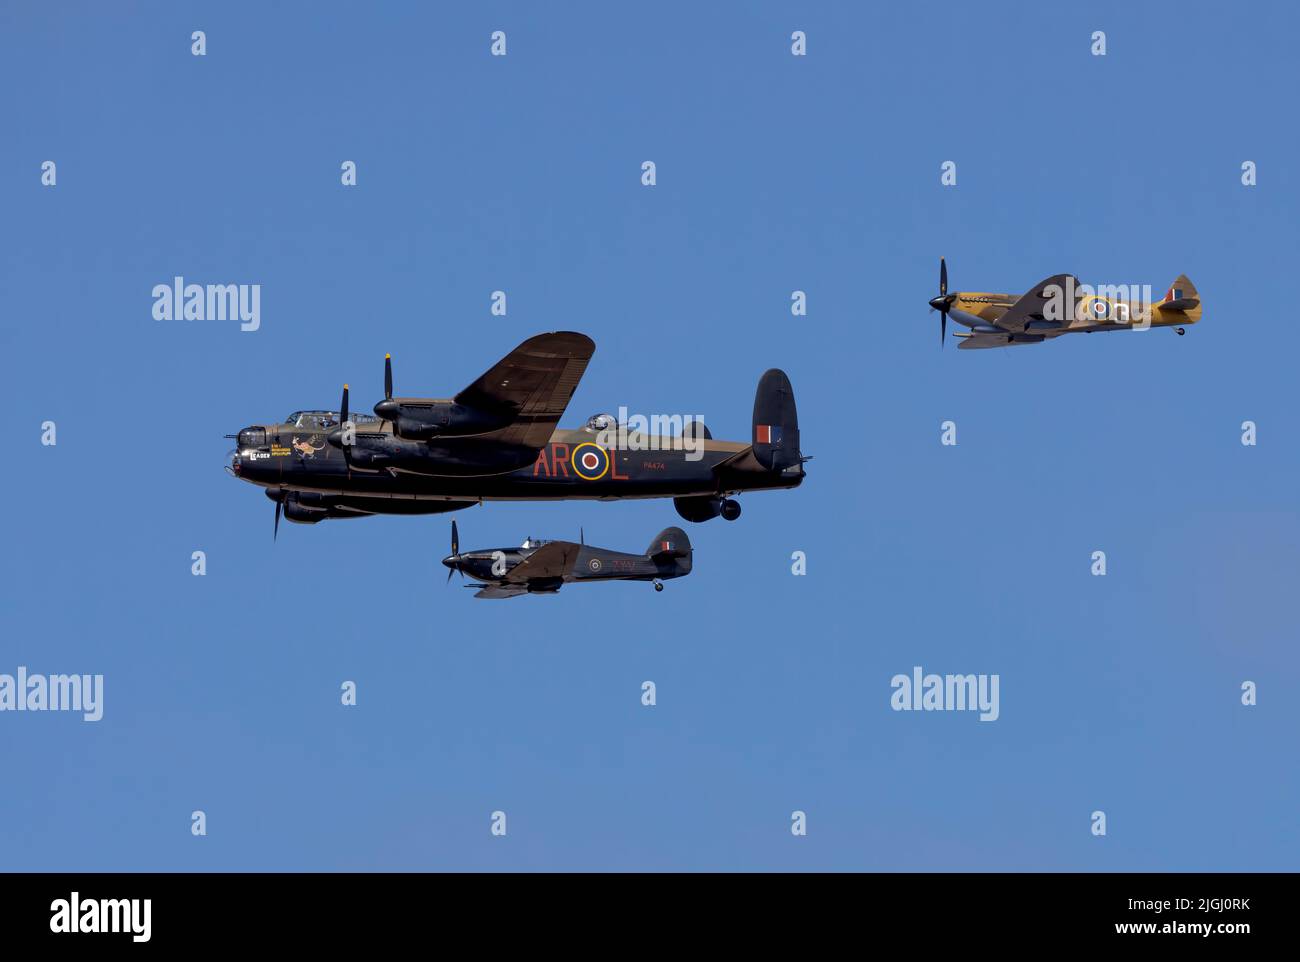 An RAF Hurricane and Spitfire flank a Lancaster bomber forming the Battle of Britain Memorial Flight displaying at Southport Air Show, Merseyside, UK Stock Photo